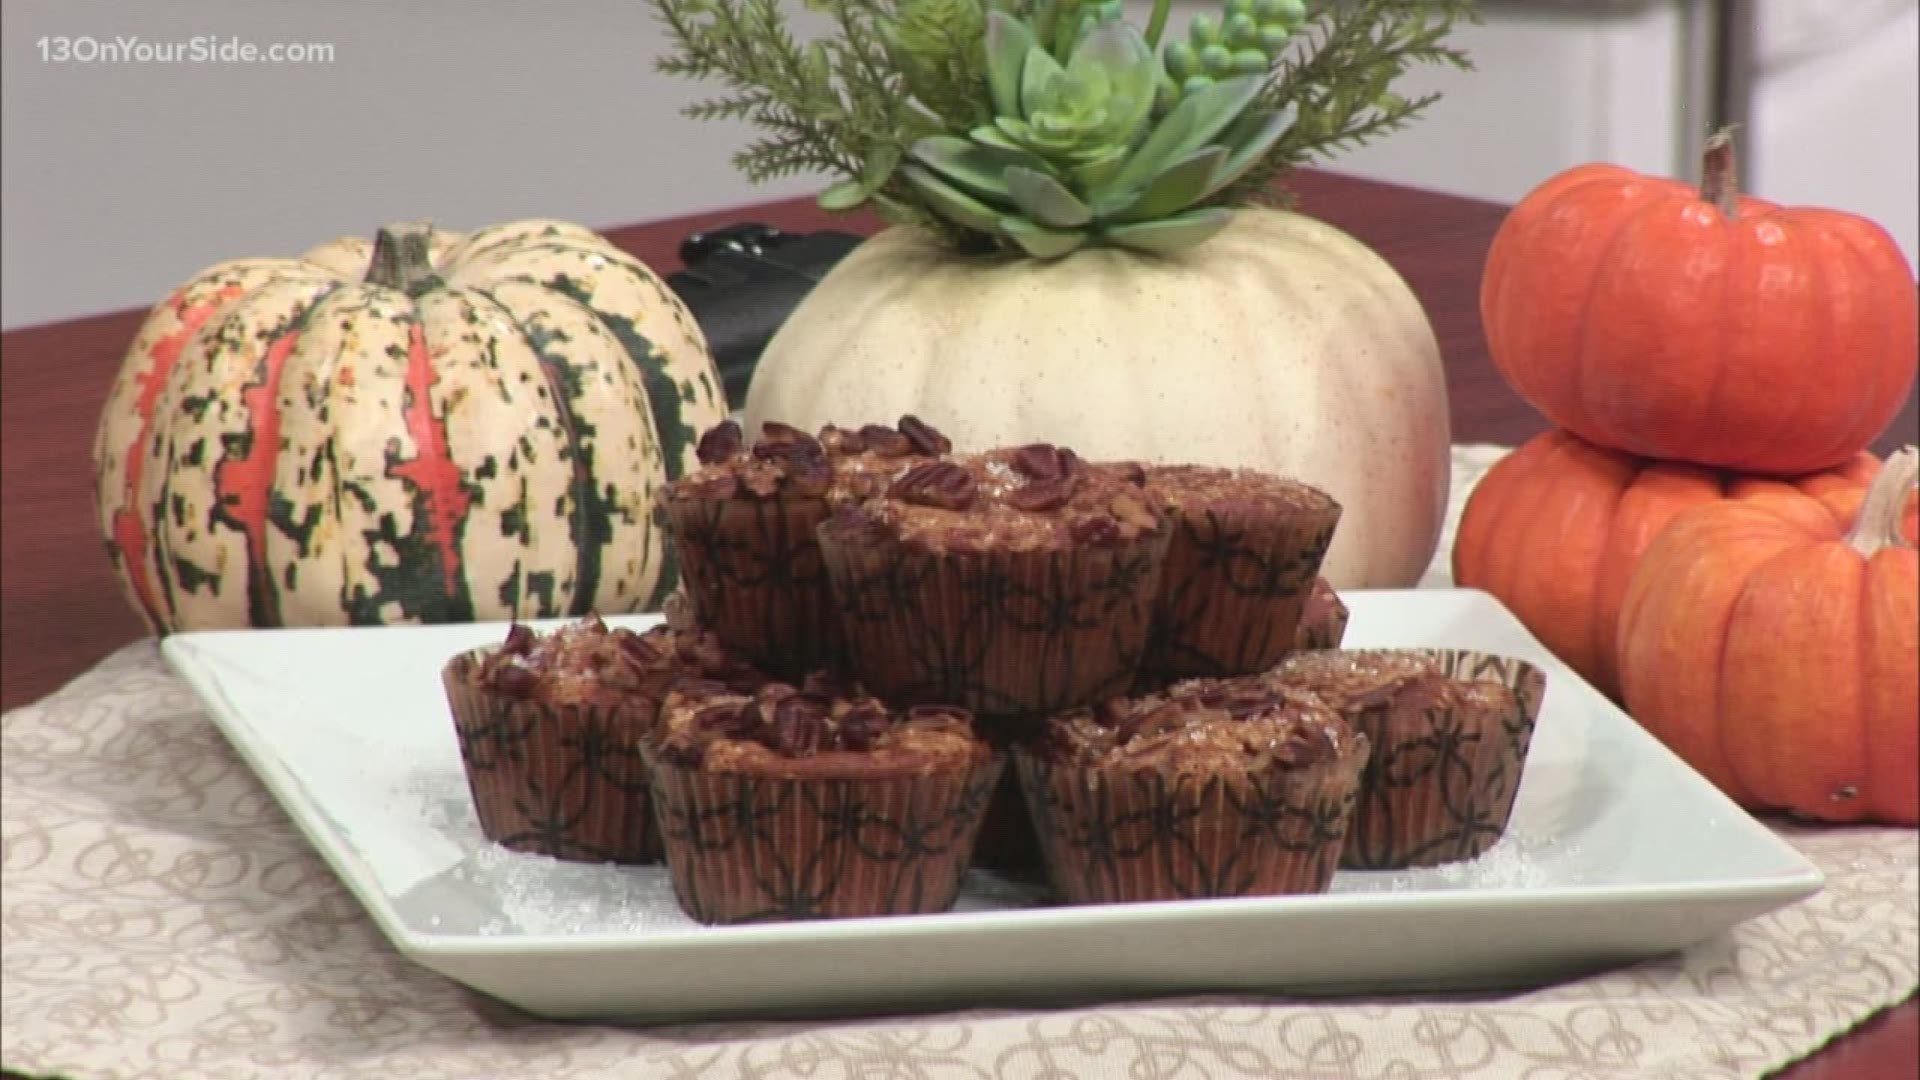 Pumpkin is a staple of fall and can be used in so many different ways. The ingredient is also quite healthy.